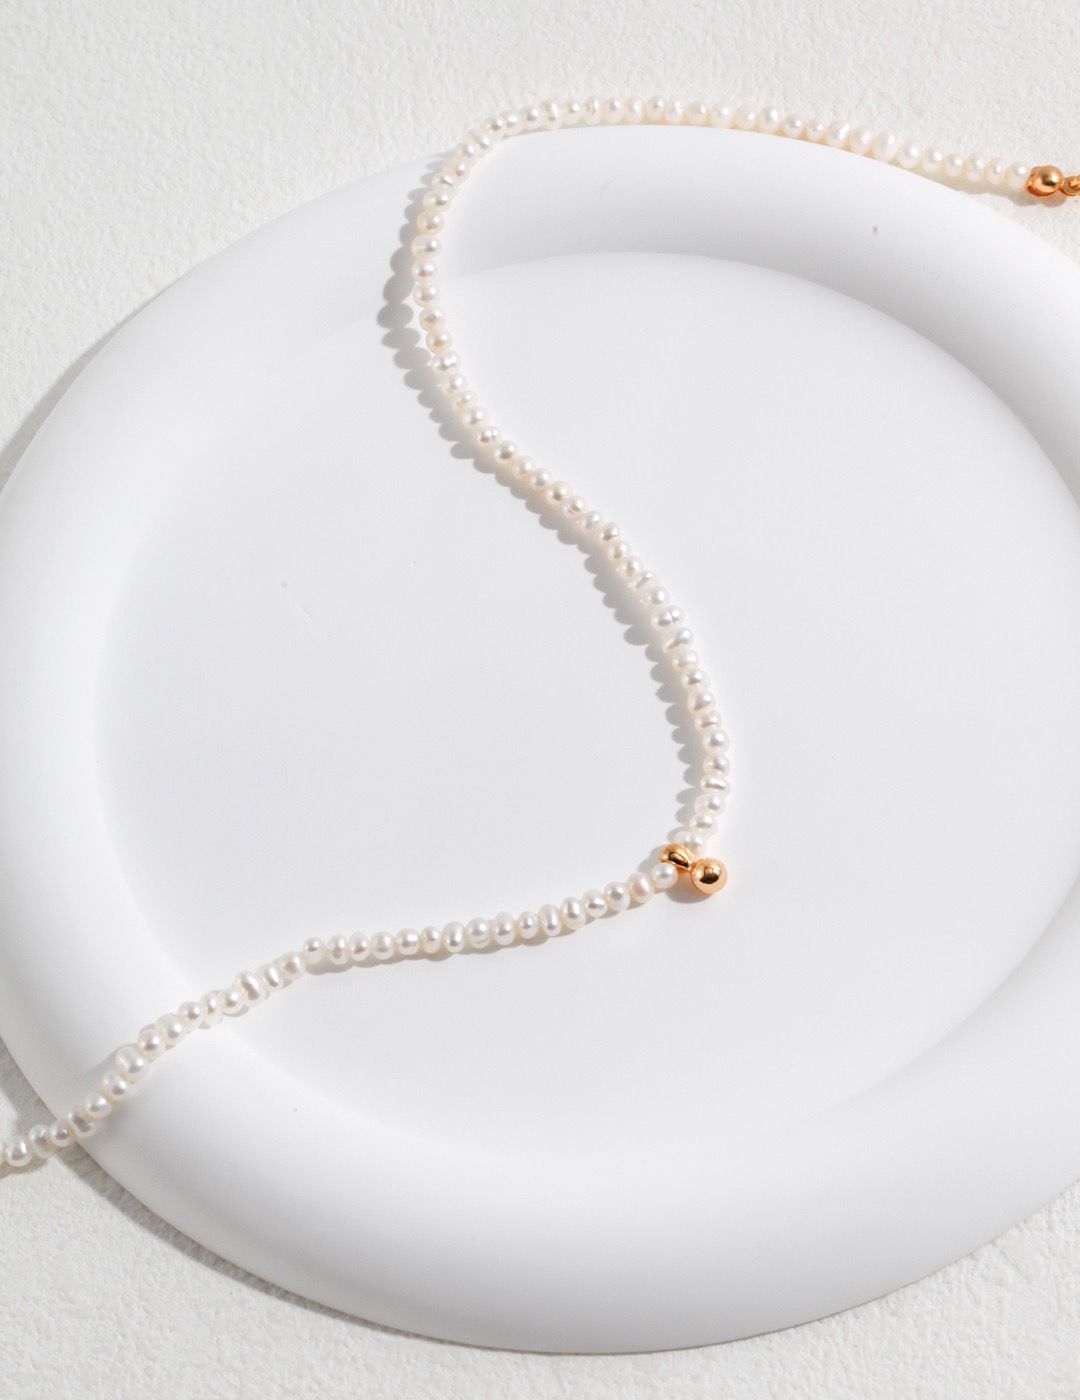 Elegant beaded necklace with freshwater pearls